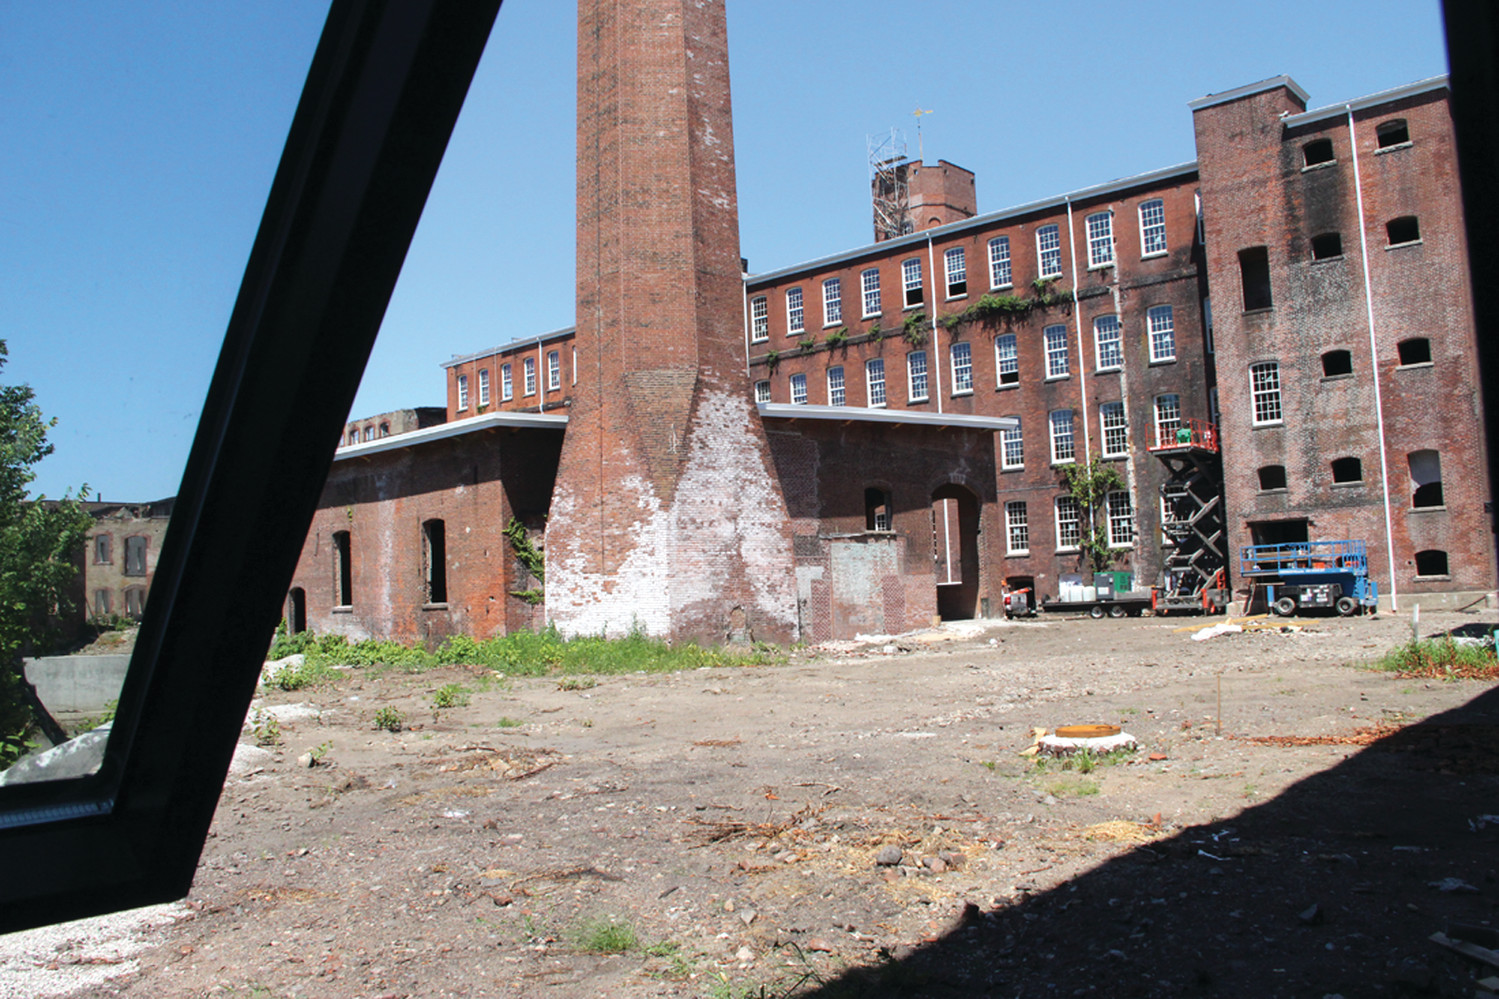 SOME CLEANUP REQUIRED: A courtyard at the Pontiac Mills property provides a rear view of a building on Knight Street. The mill property affords the opportunity for several different types of buildings. This smaller building here could perhaps become an office for rentals, of which there should be many, as the complex will eventually have 137 rental units.